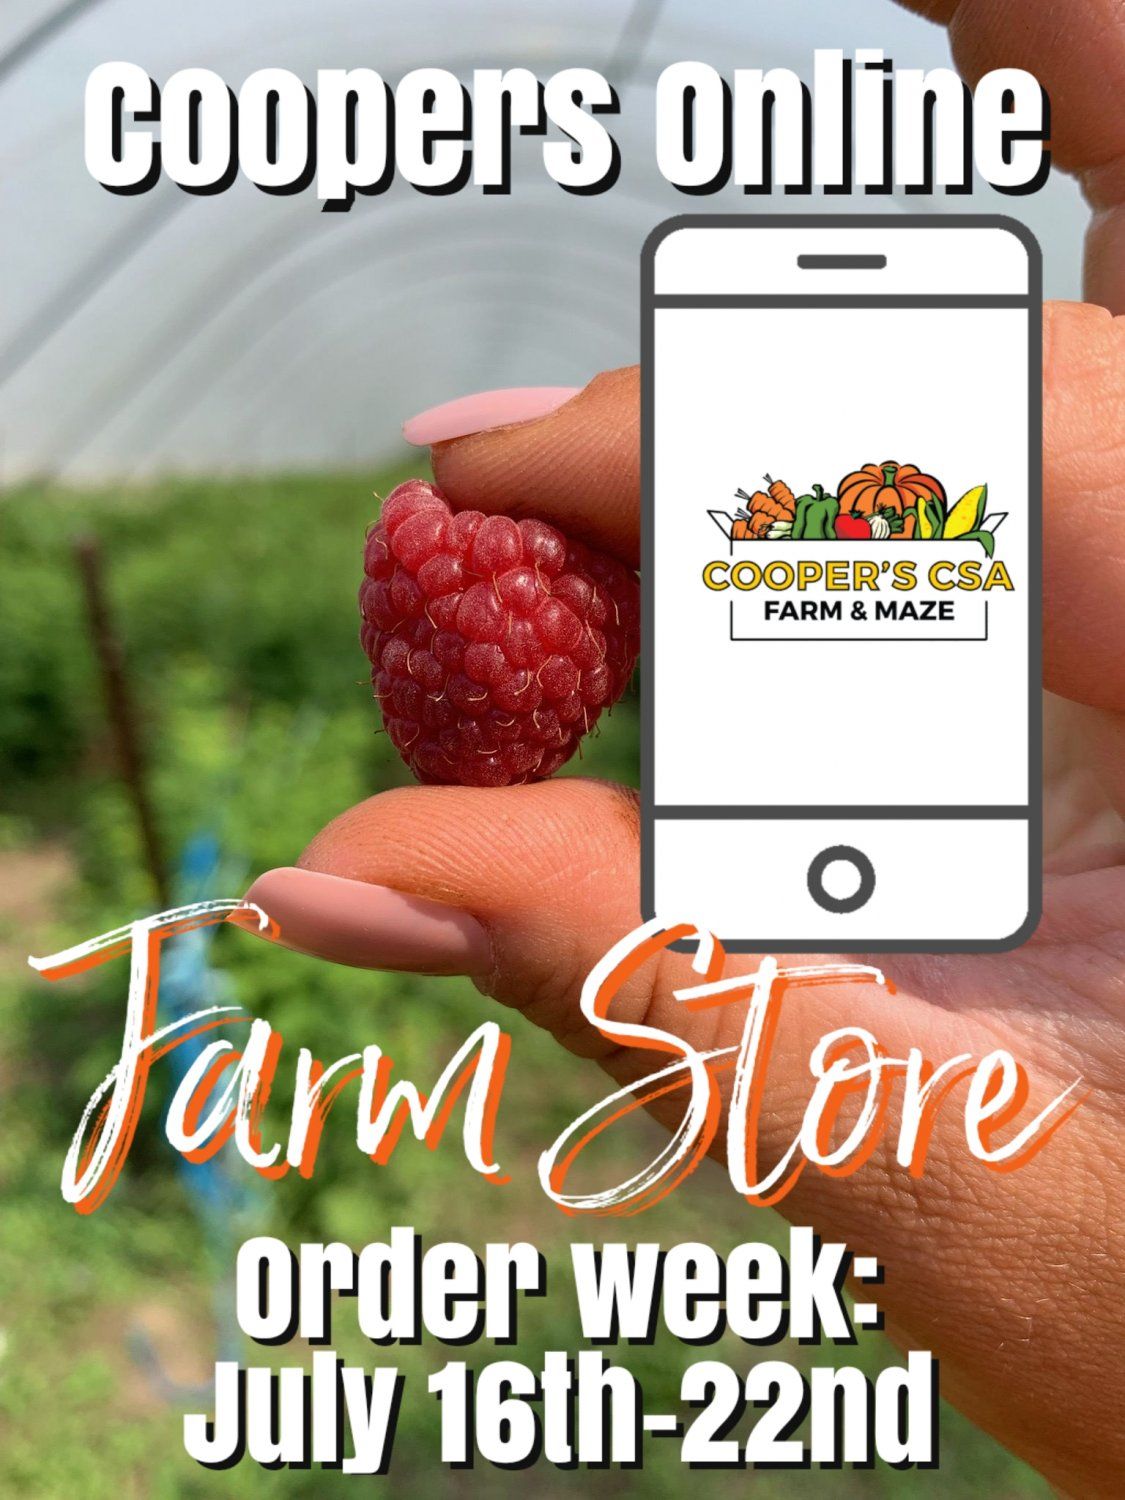 Coopers Online Farm Store- Order Week July 16th-22nd